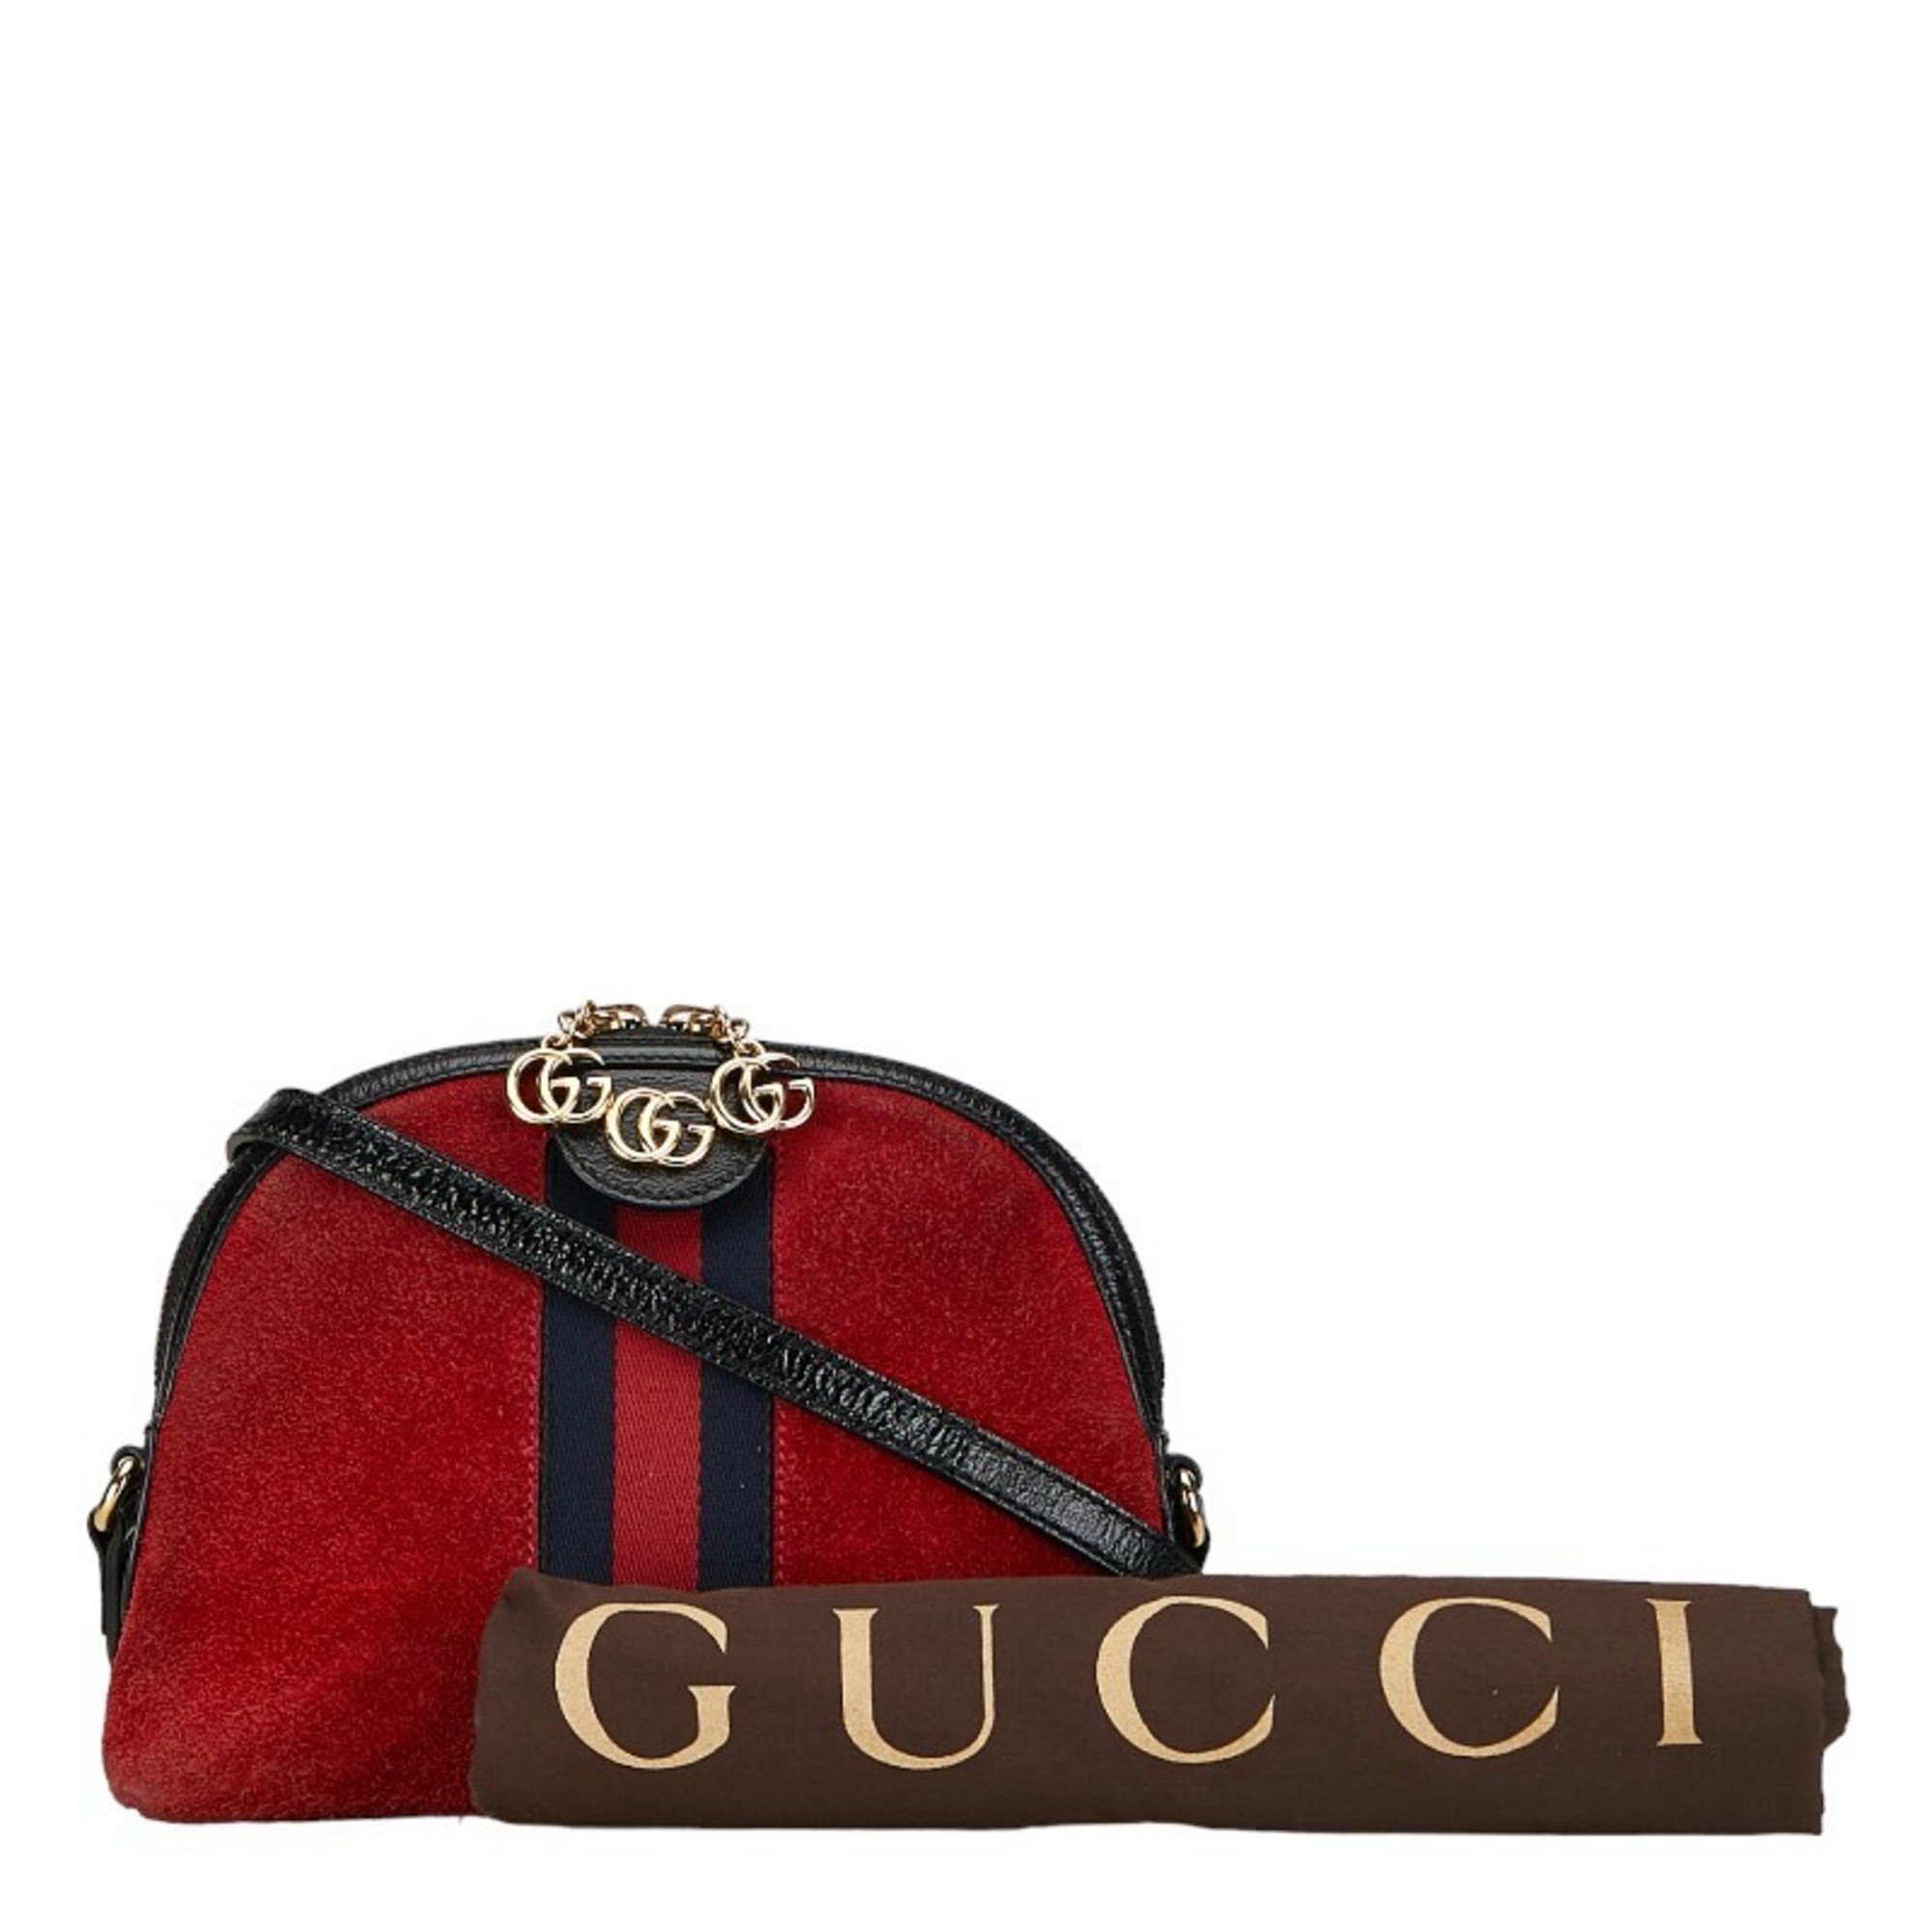 Gucci Ophidia Sherry Line Shoulder Bag 499621 Red Black Suede Leather Women's GUCCI